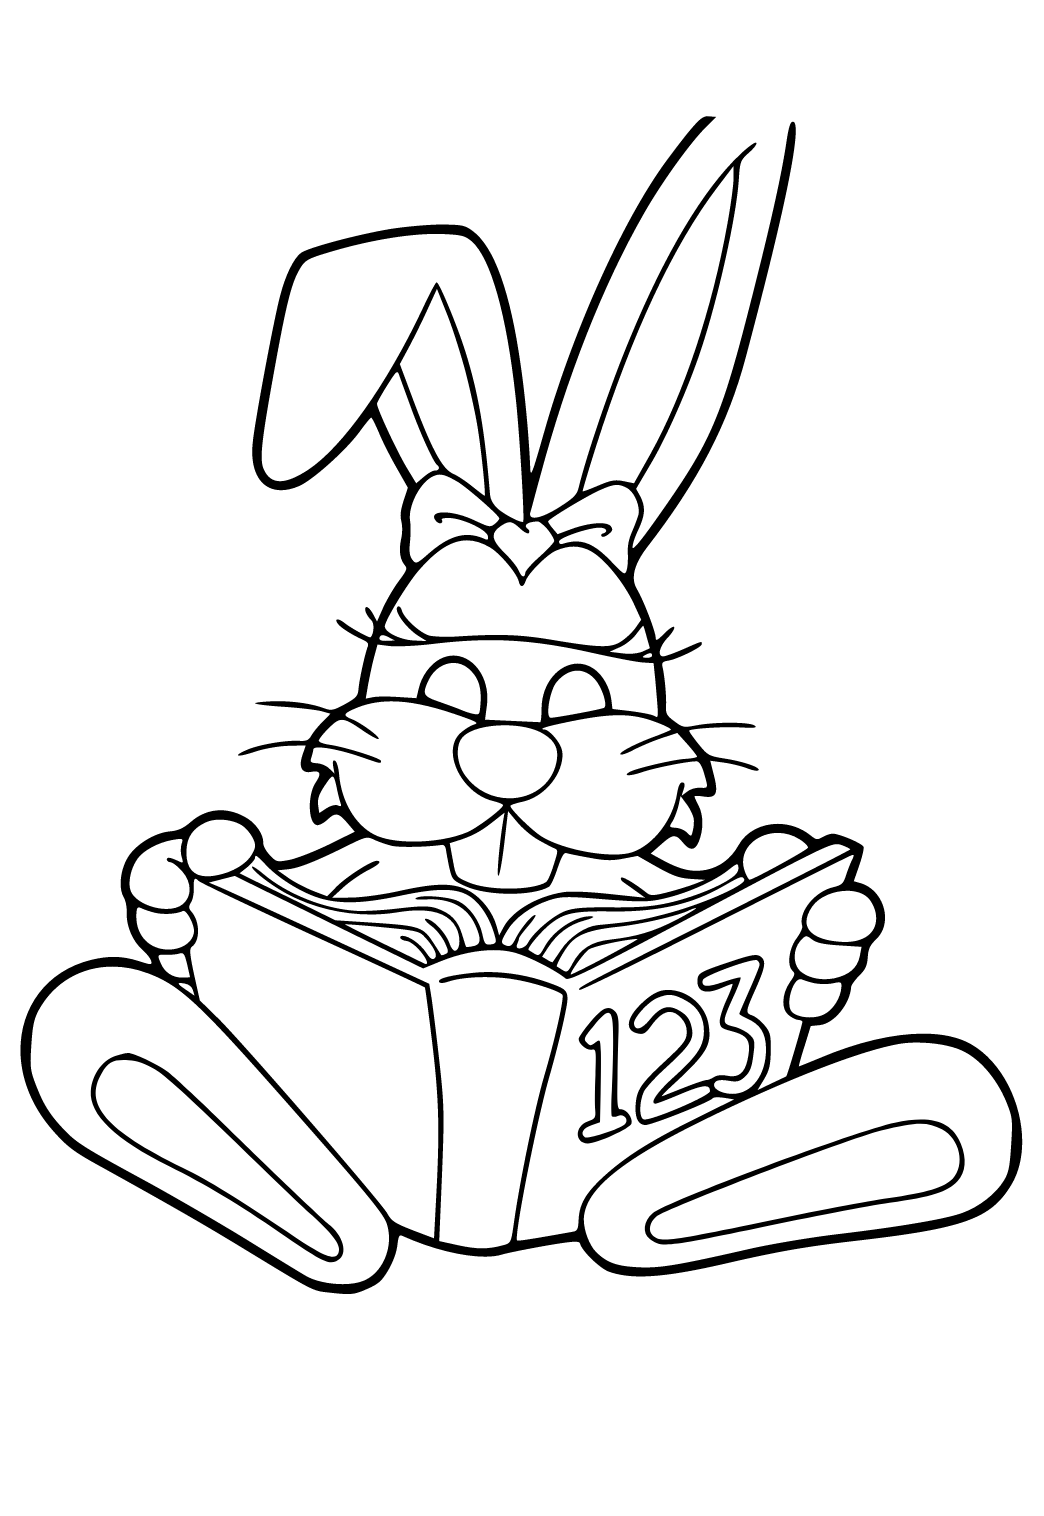 Free printable math hare coloring page for adults and kids